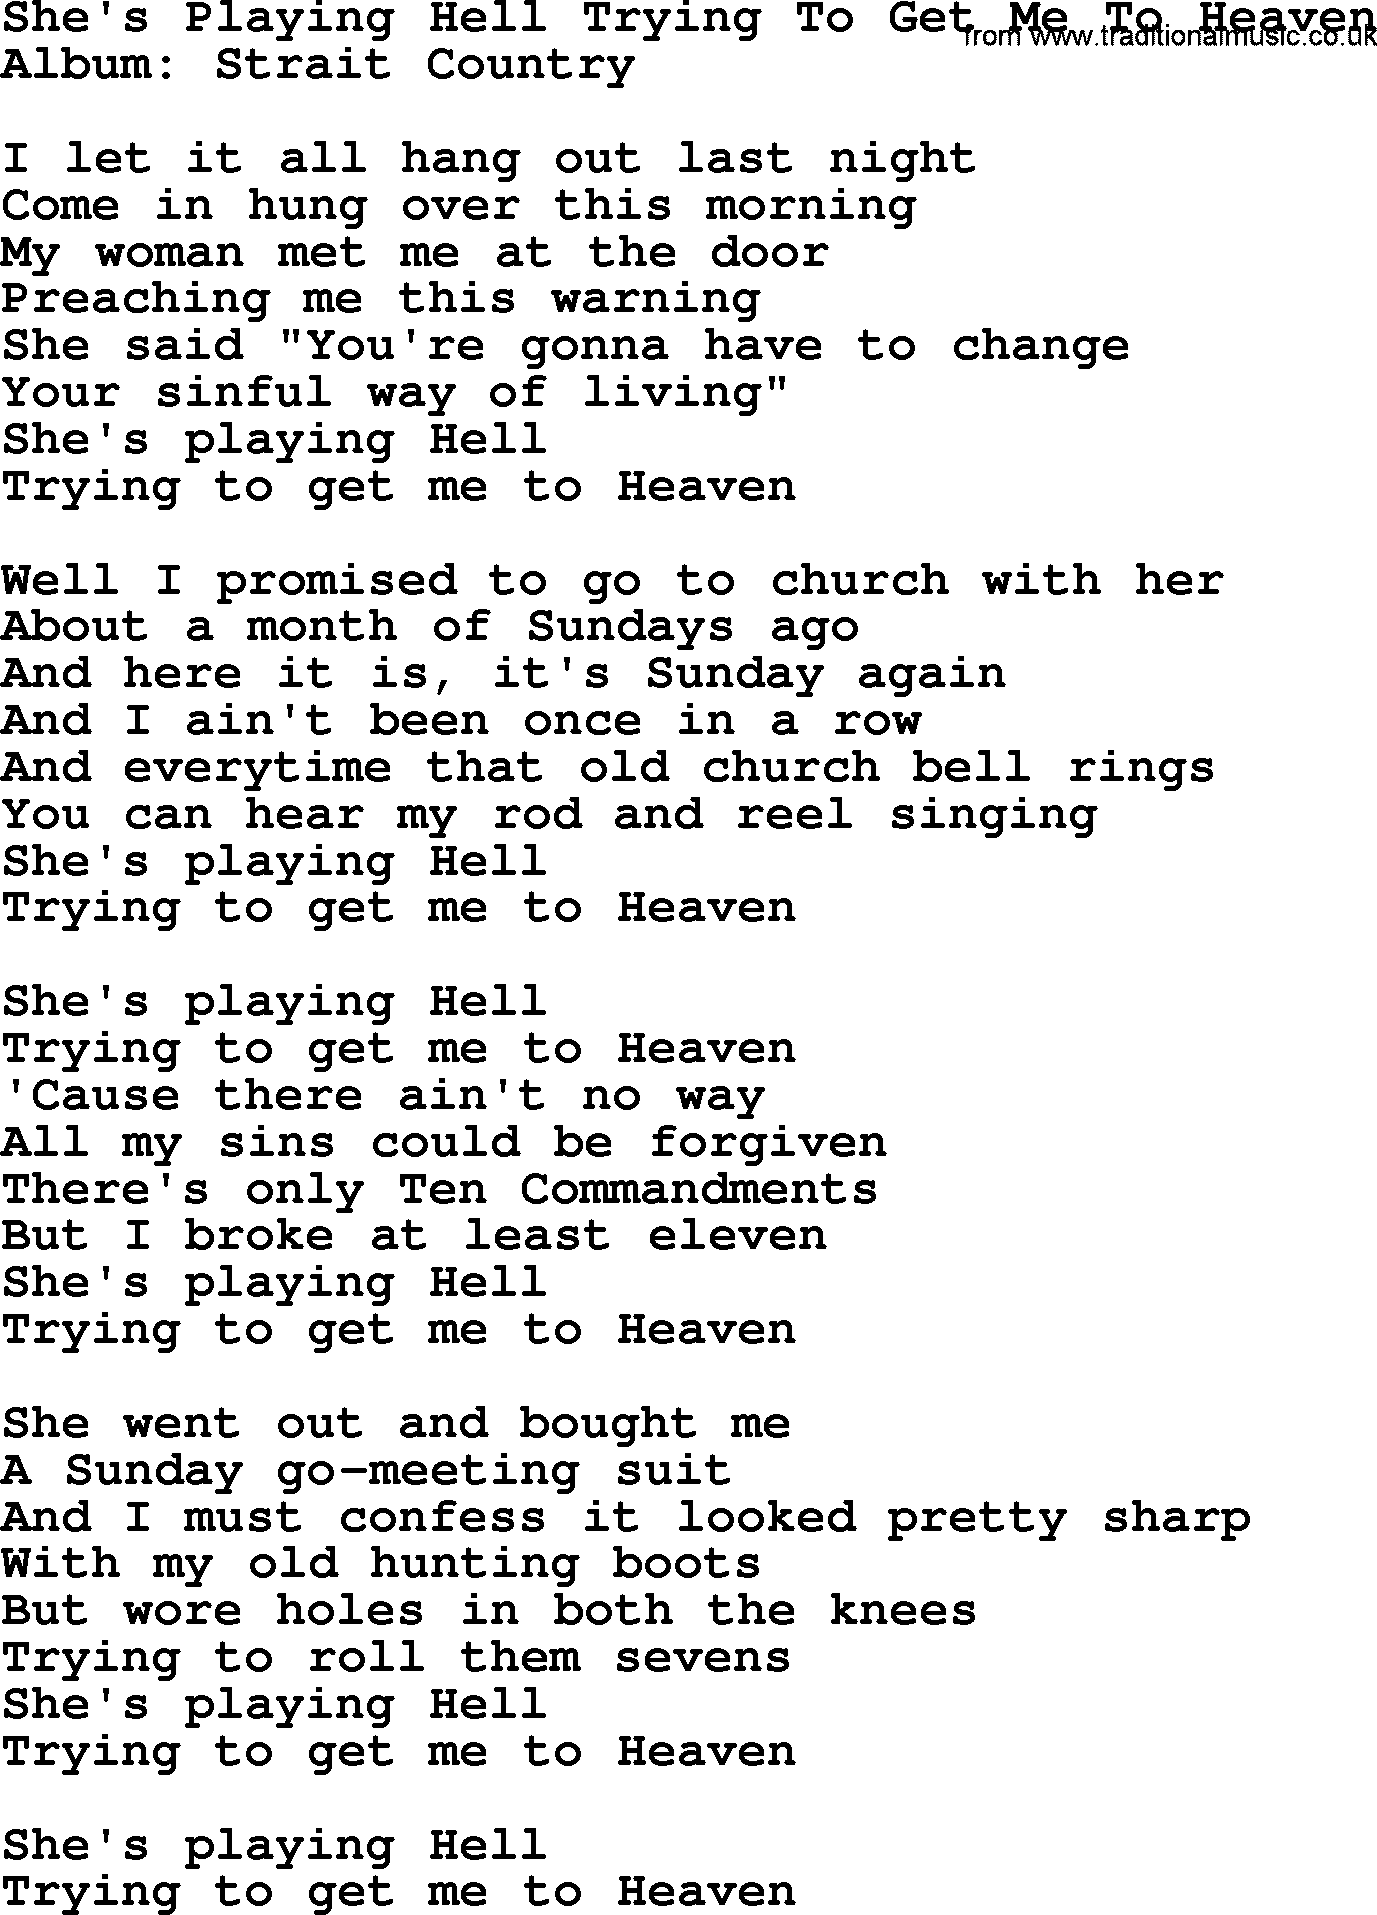 George Strait song: She's Playing Hell Trying To Get Me To Heaven, lyrics